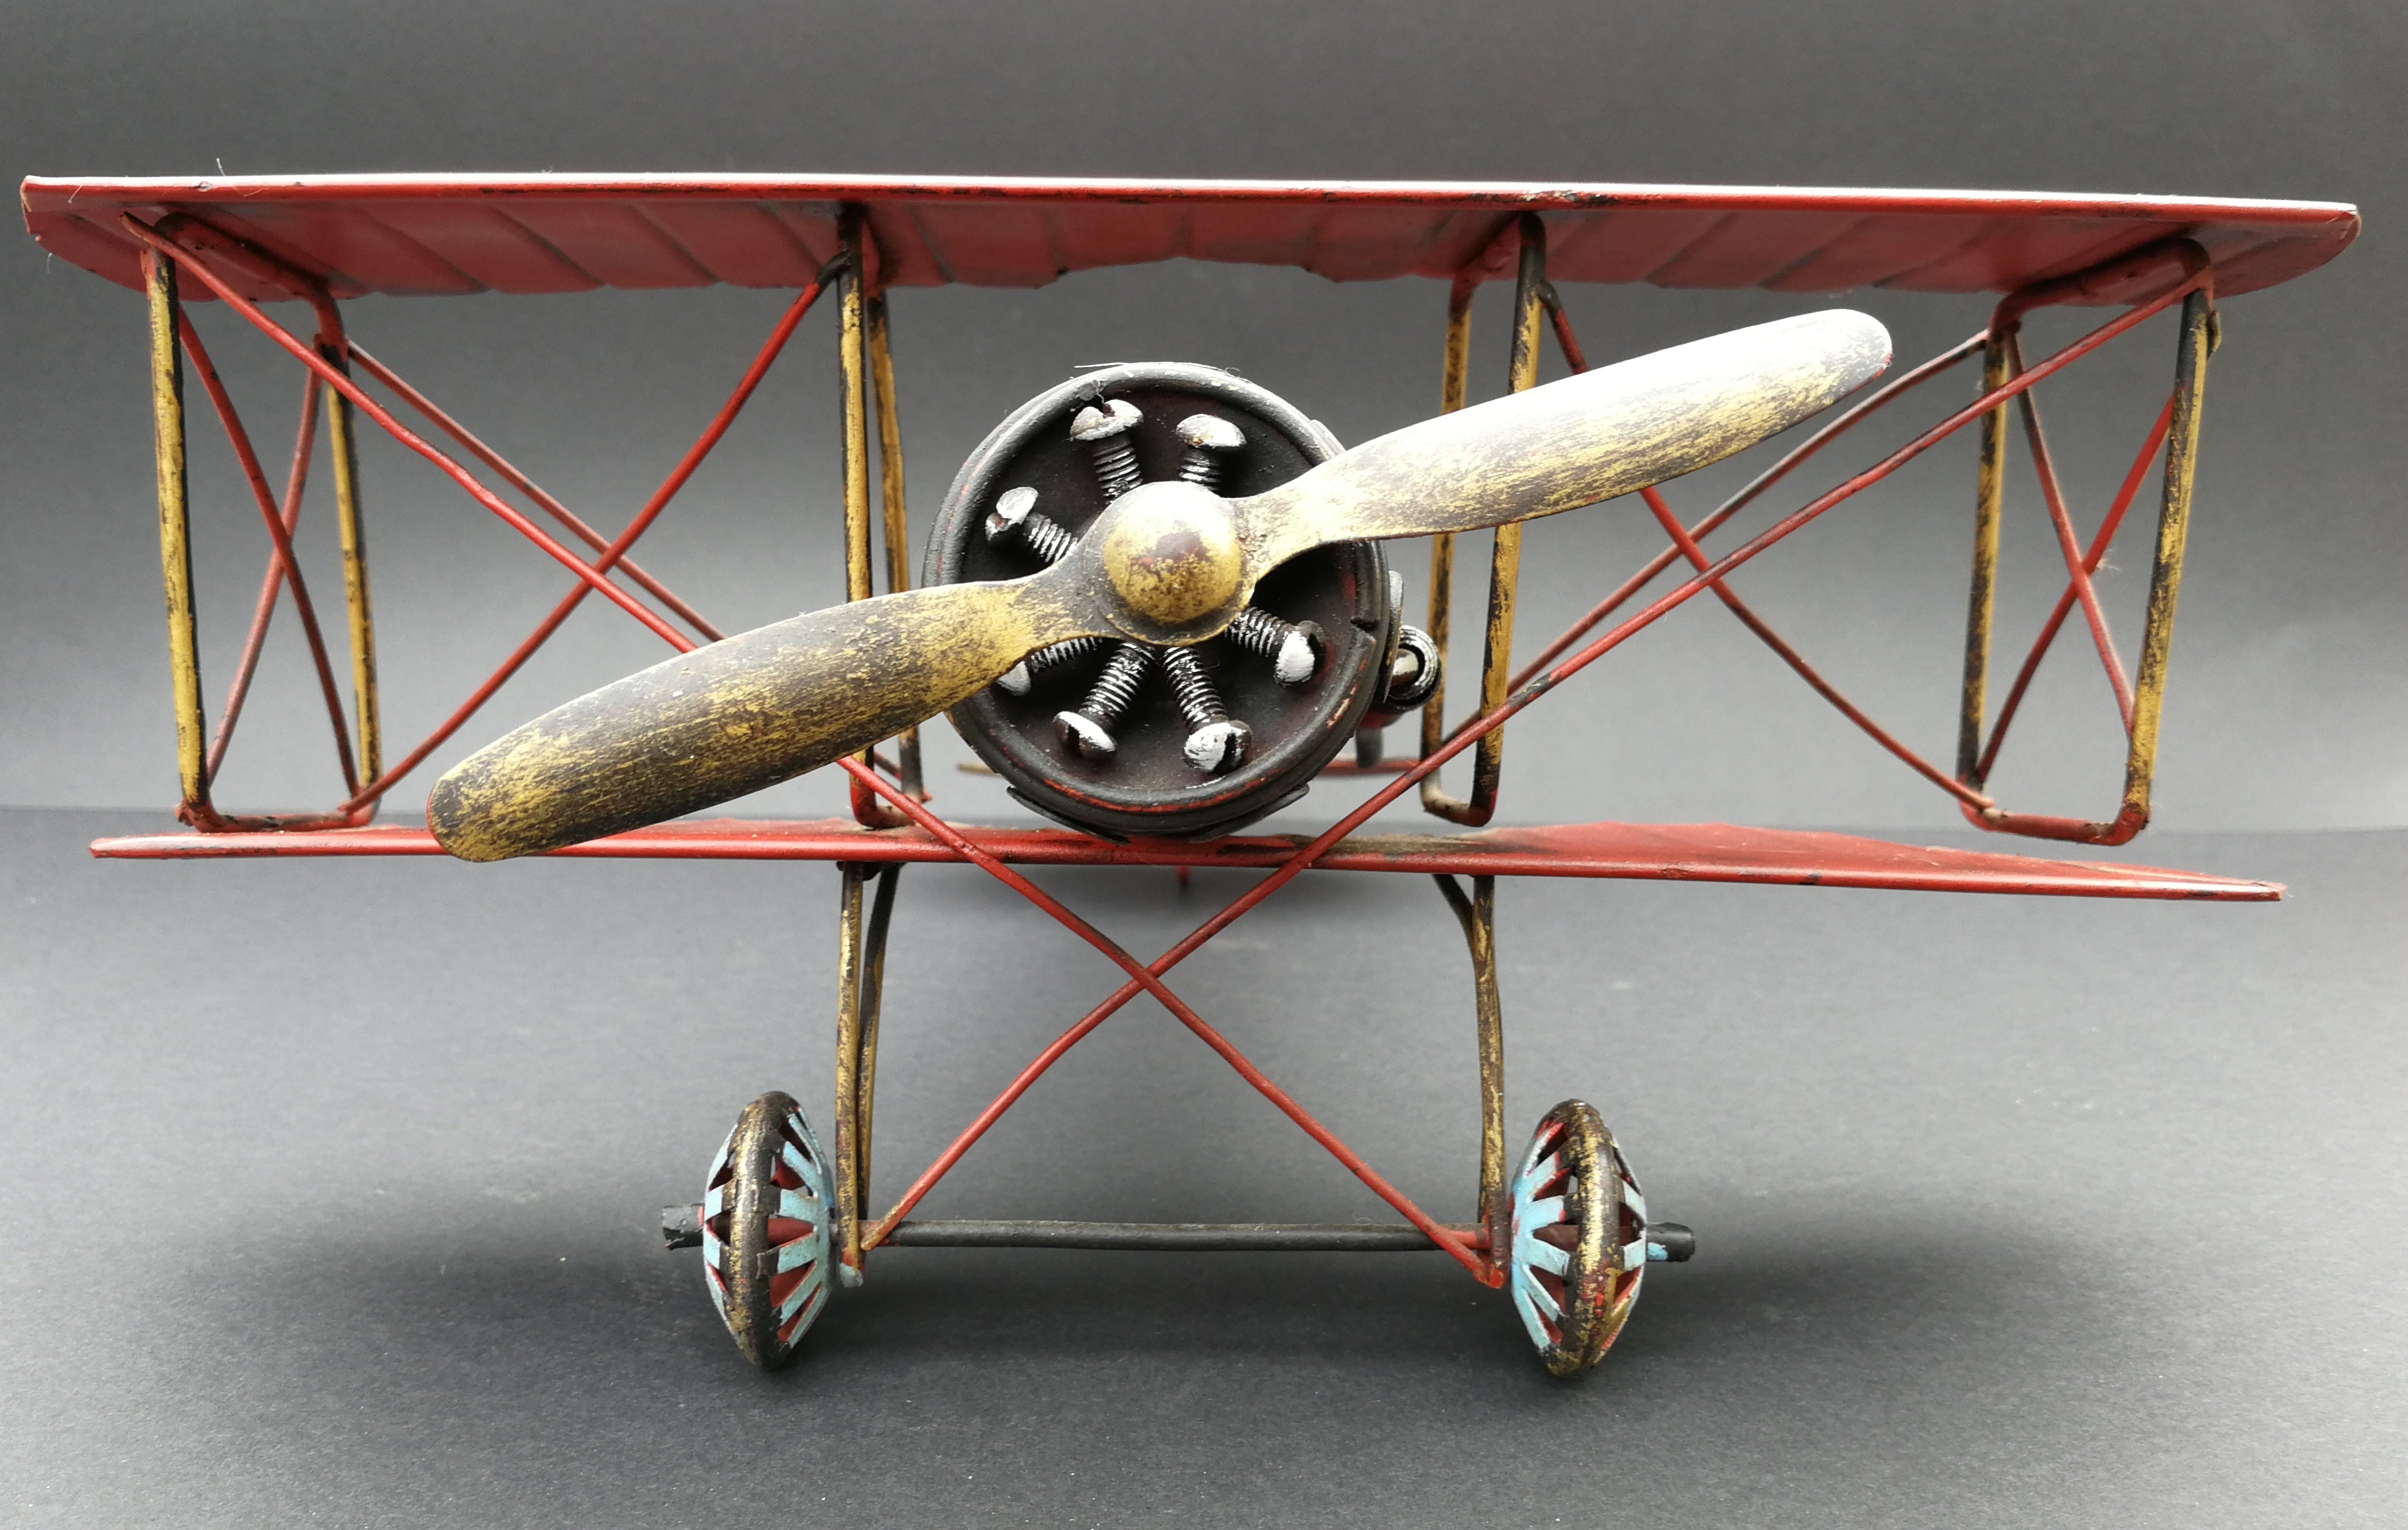 Tin aeroplane. Red and black. Hand made. Front view.